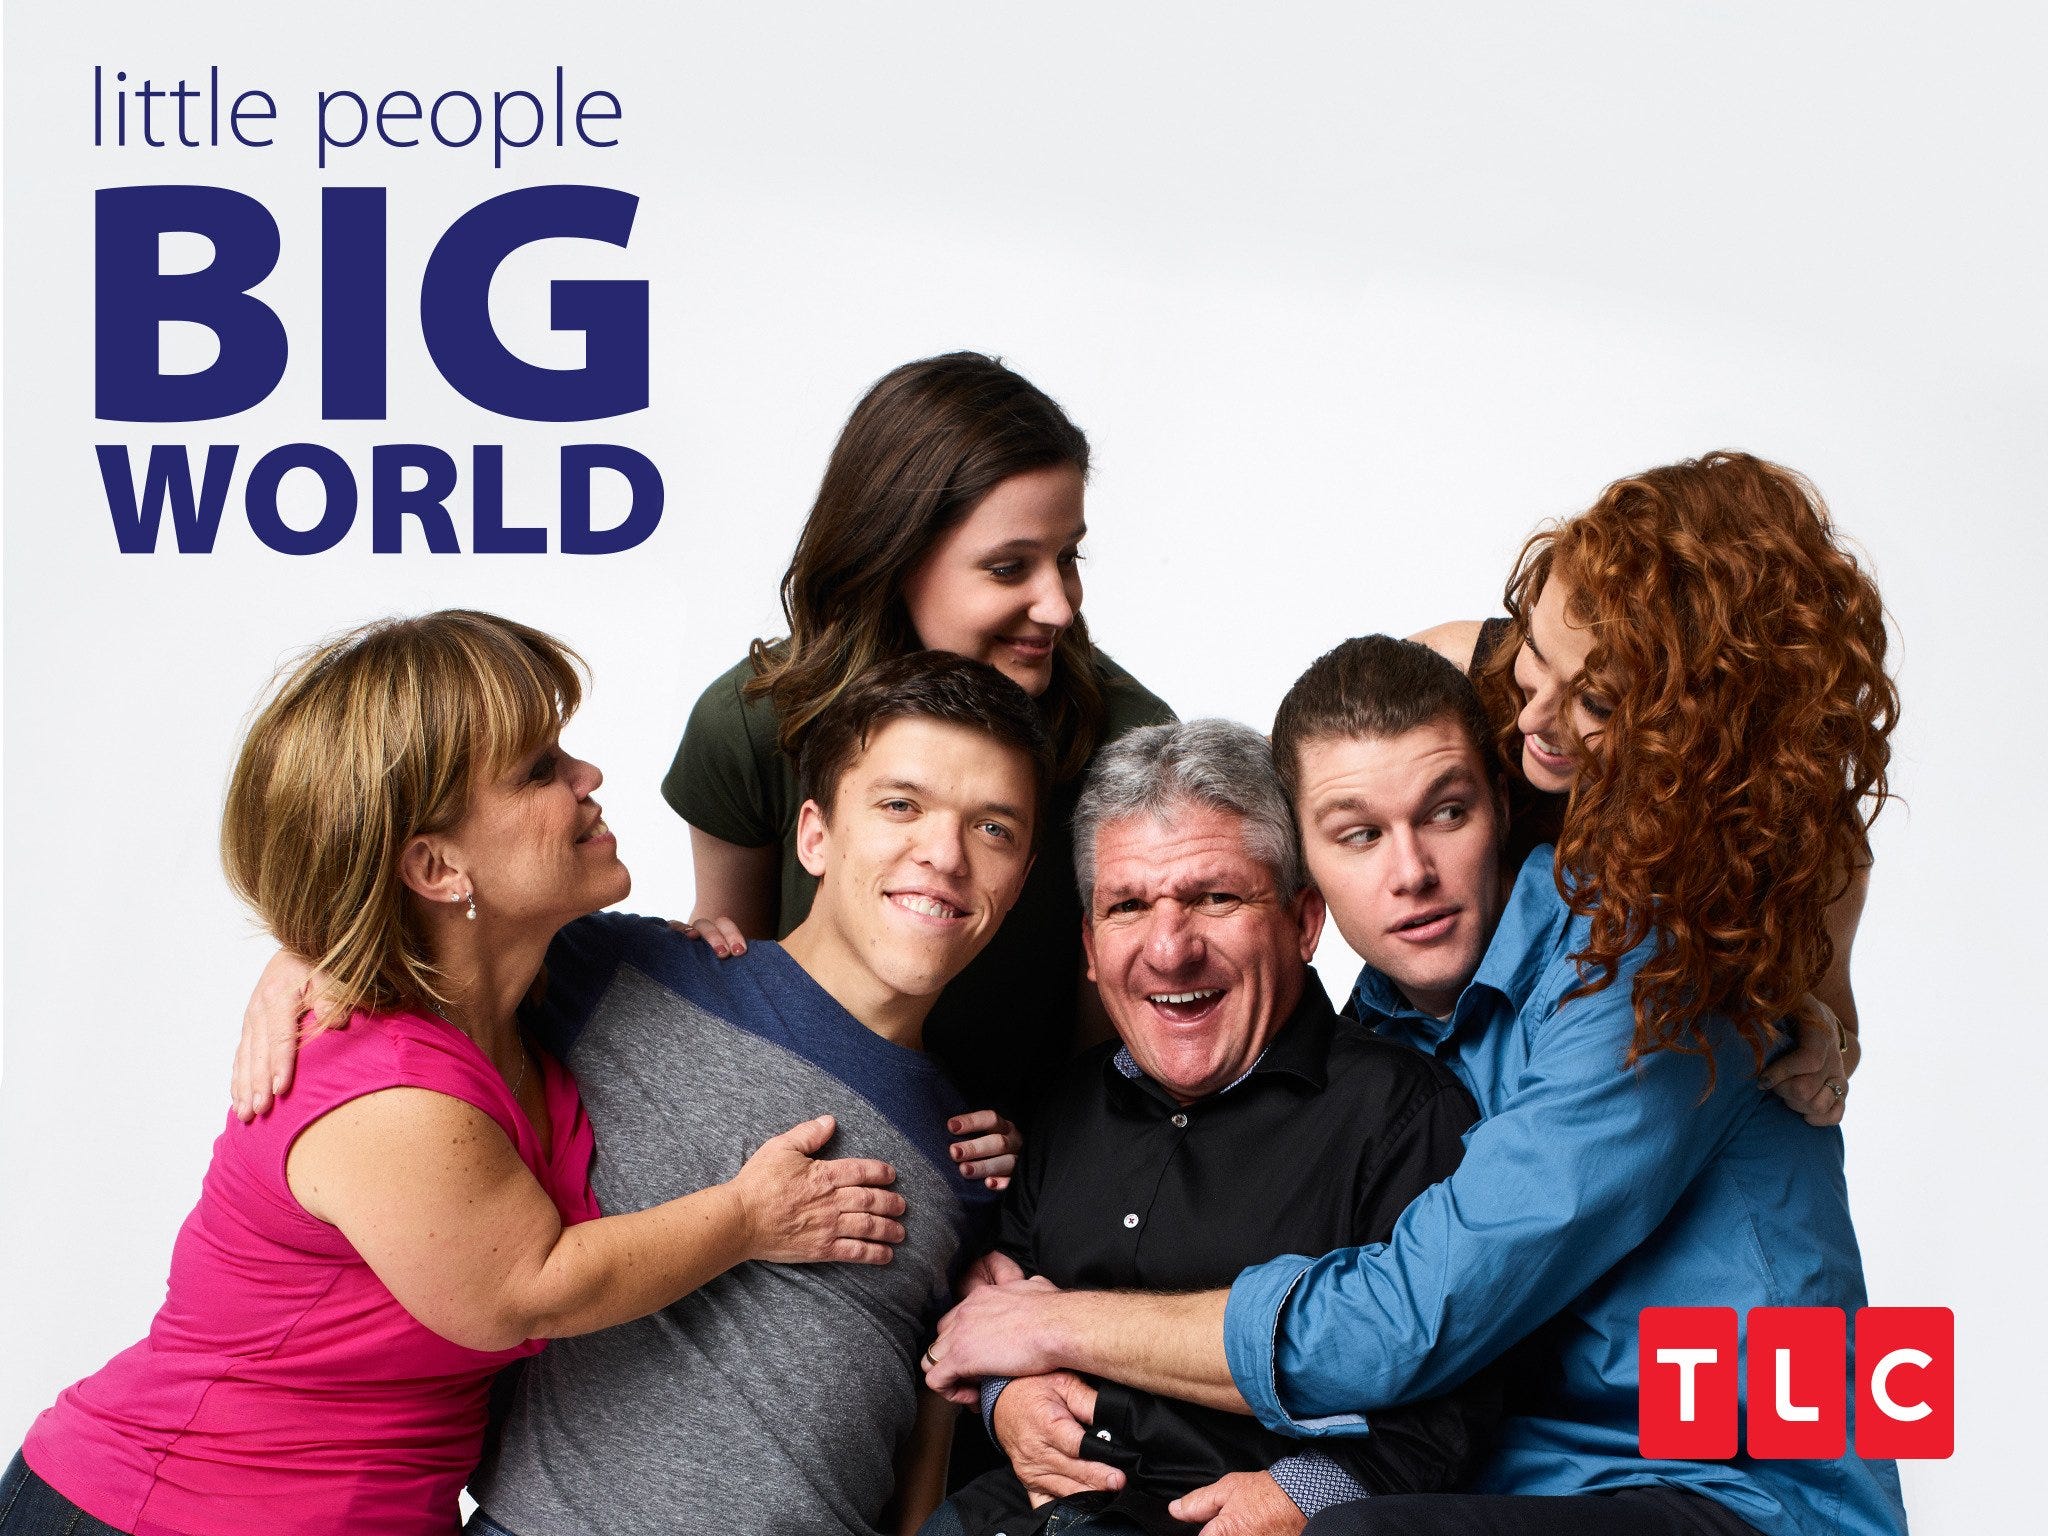 Watch~!! Little People, Big World “Series 21” Ep 4 : S21E04 — [Online] FREE  | by Little People Big World S21E4 TLC | Oct, 2020 | Medium